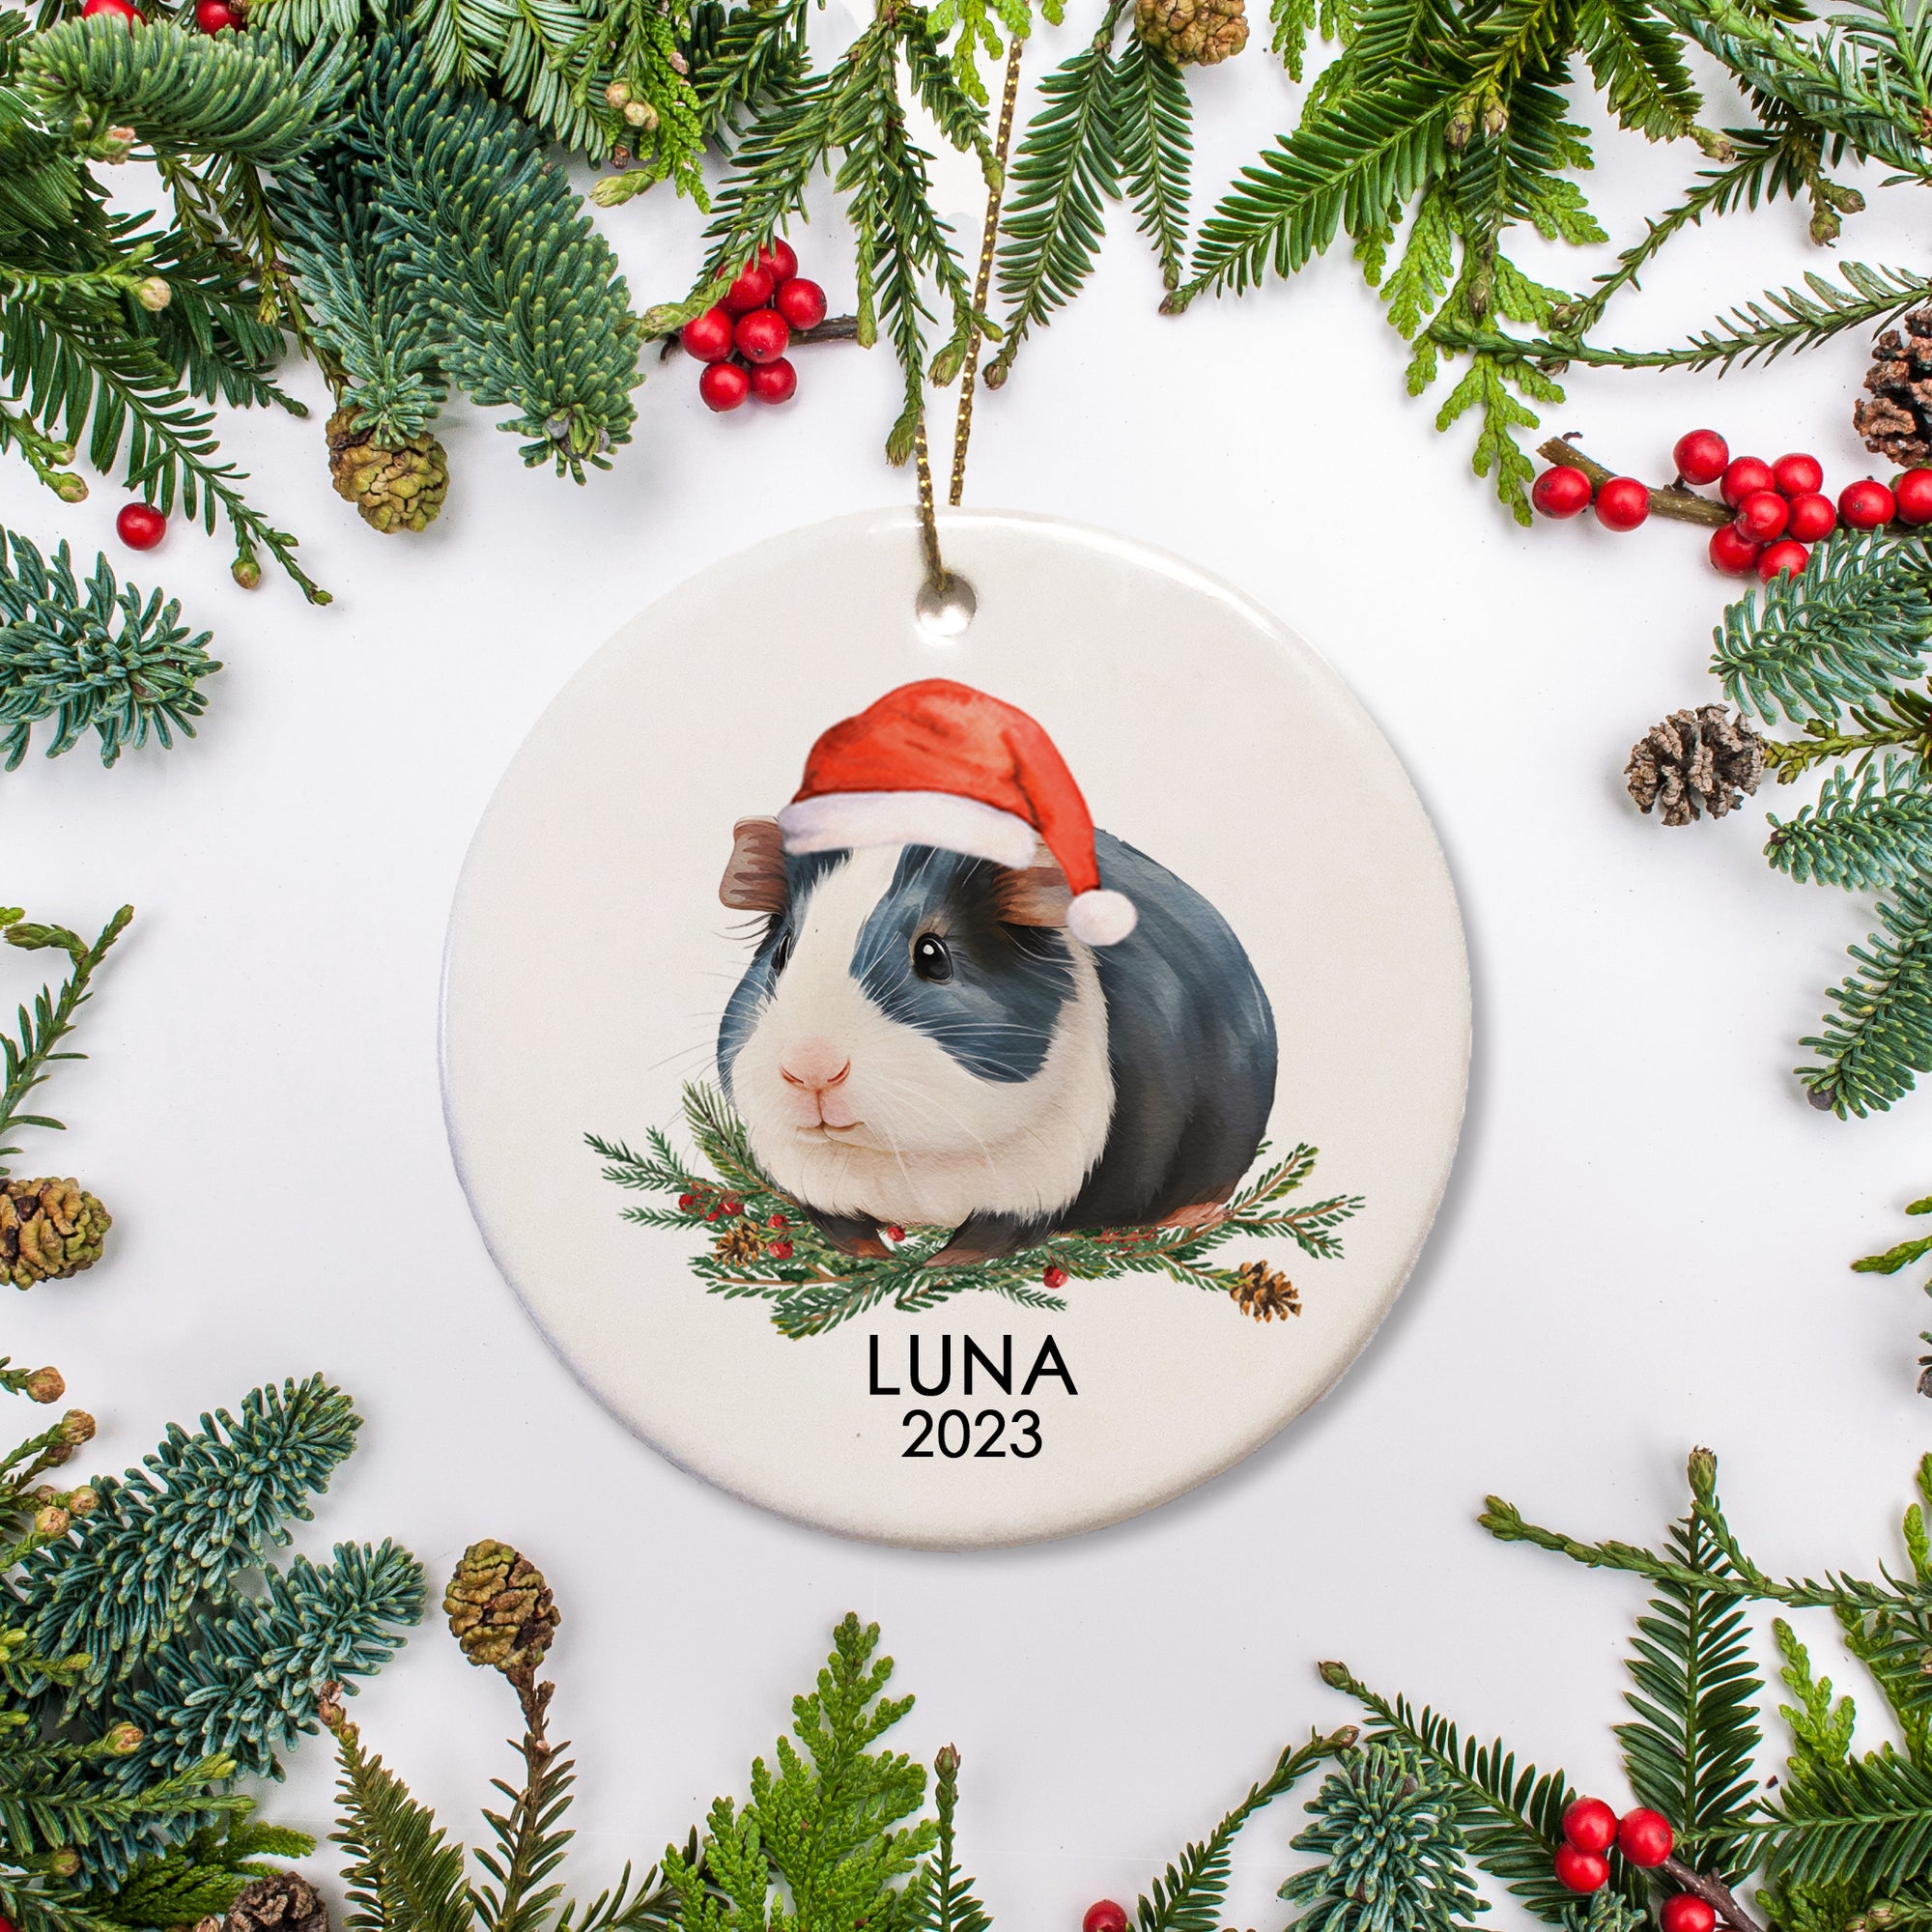 A special ornament for a special guinea pig. This is ceramic and includes a name and date for a  bicolor guinea pig